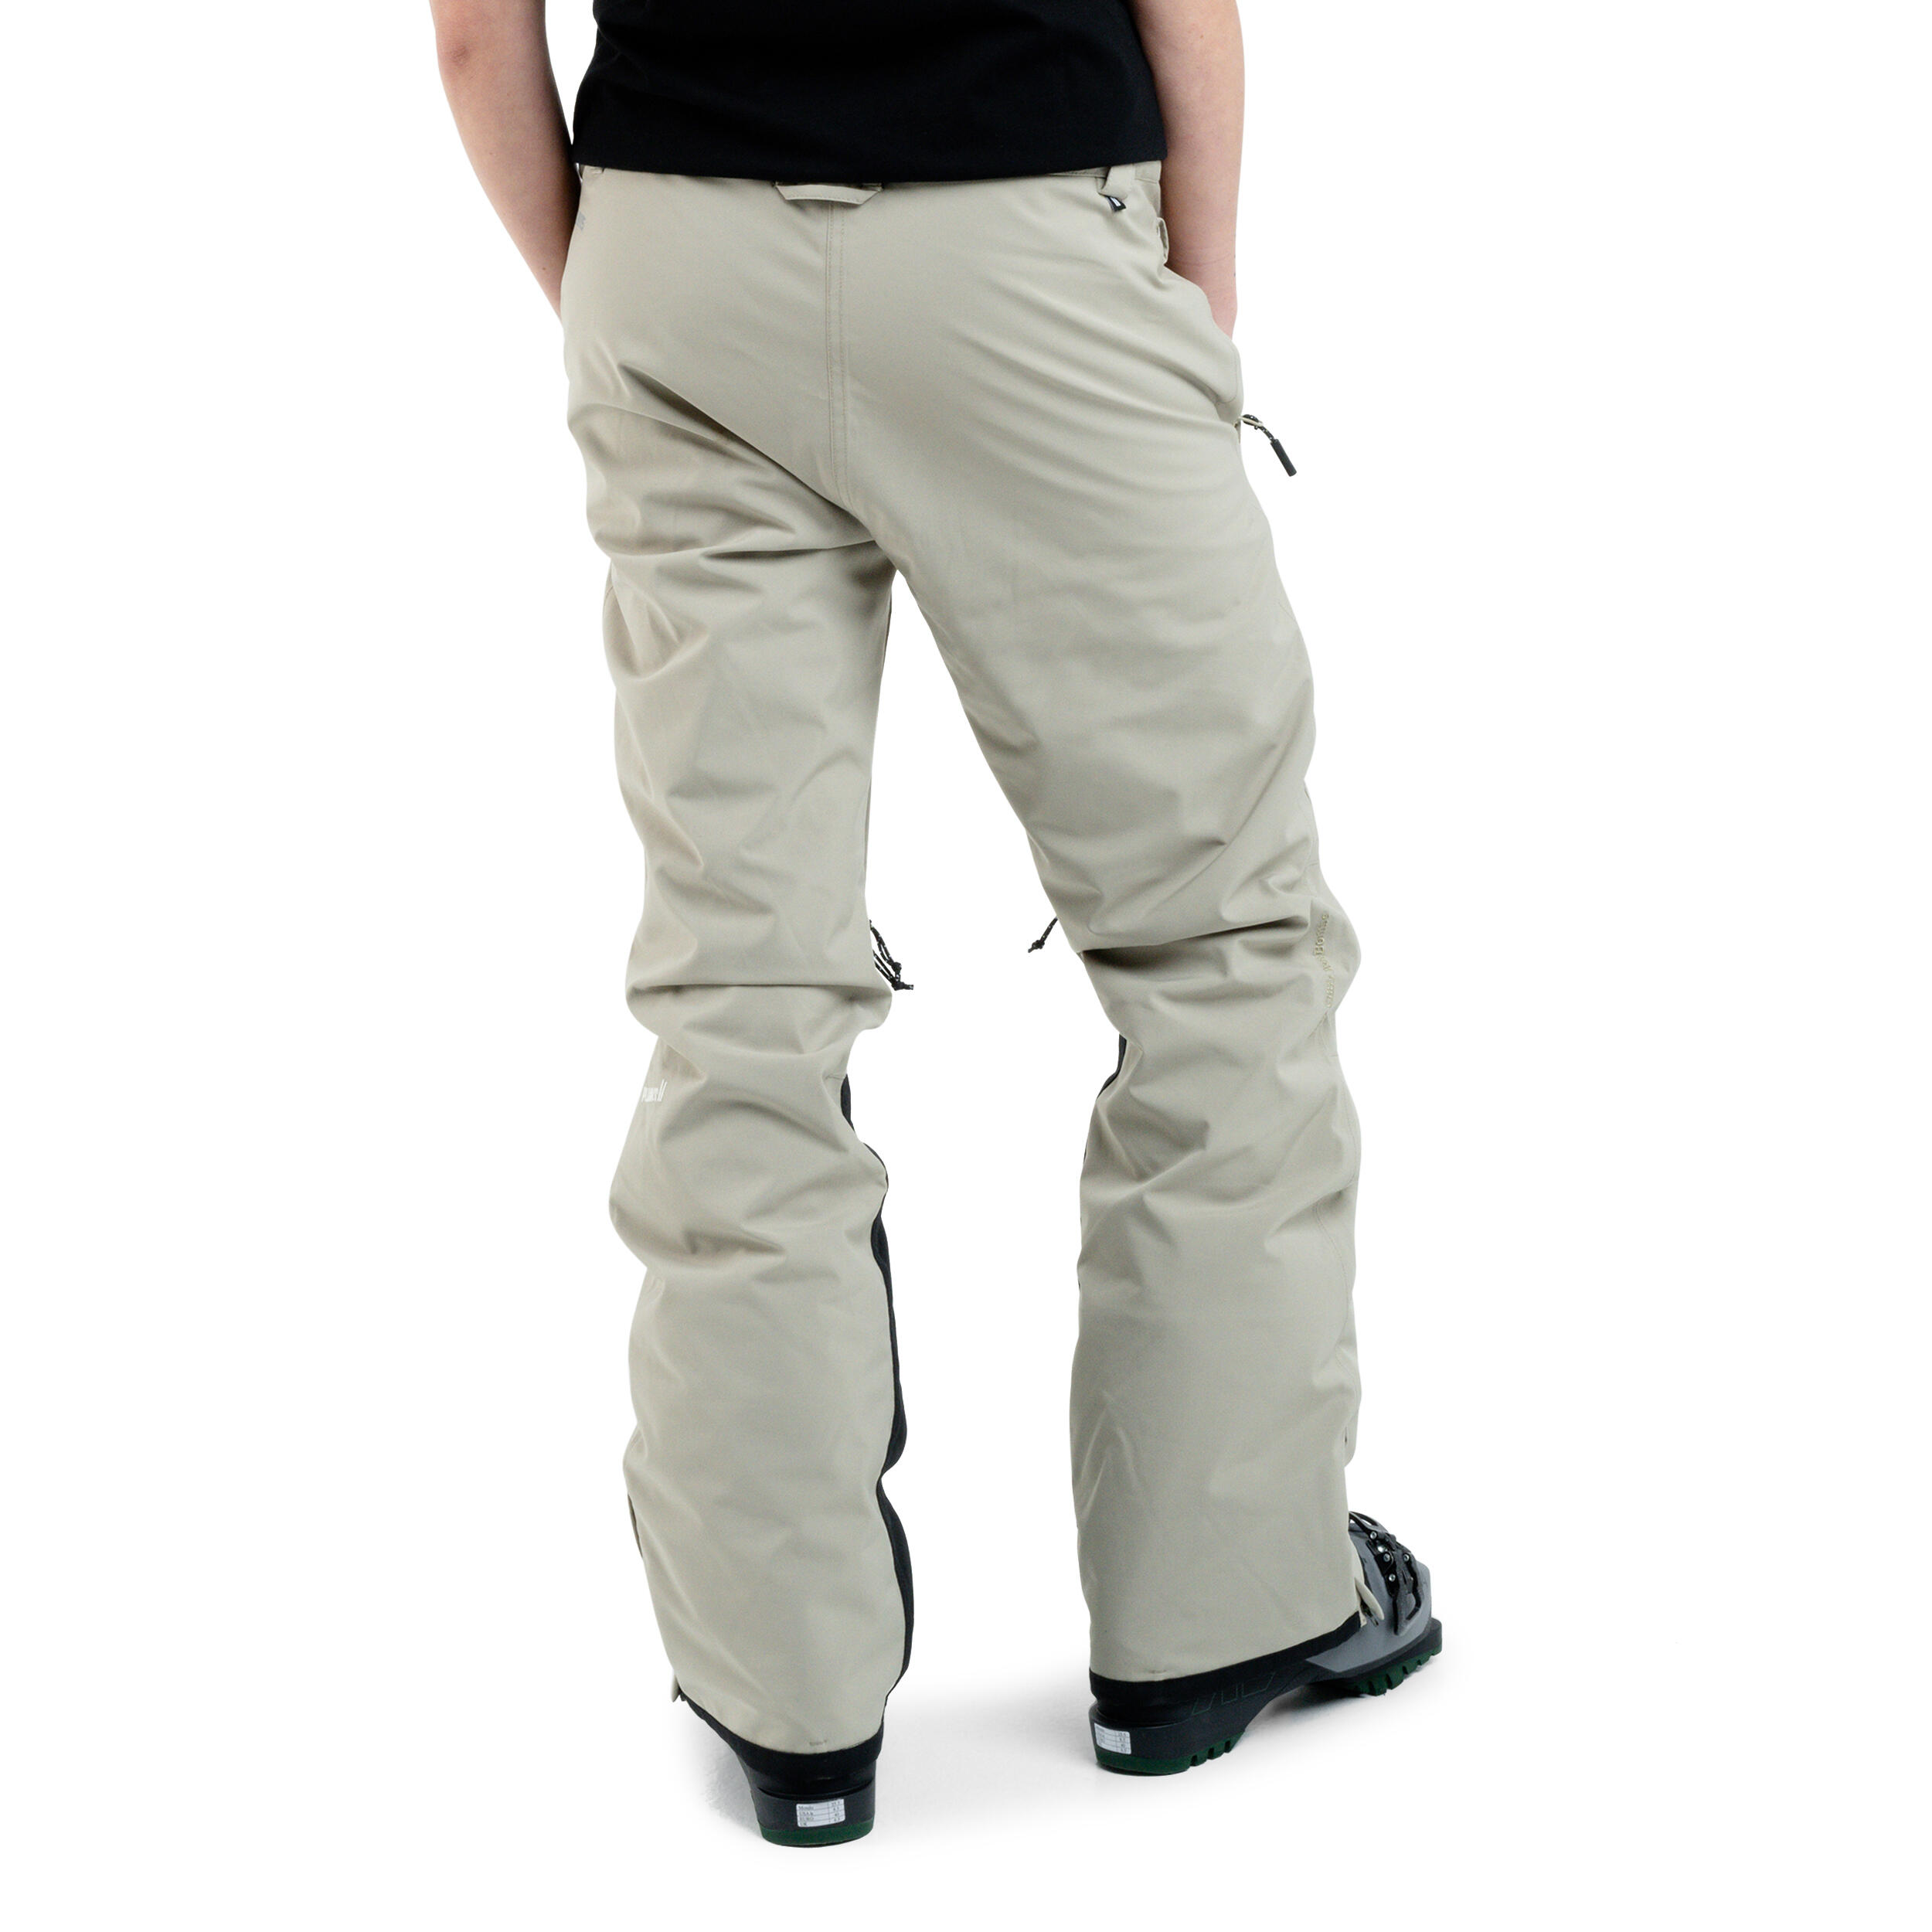 Planks All-Time Women's Insulated Pants in Mushroom - Ladies Sports Trousers 3/5